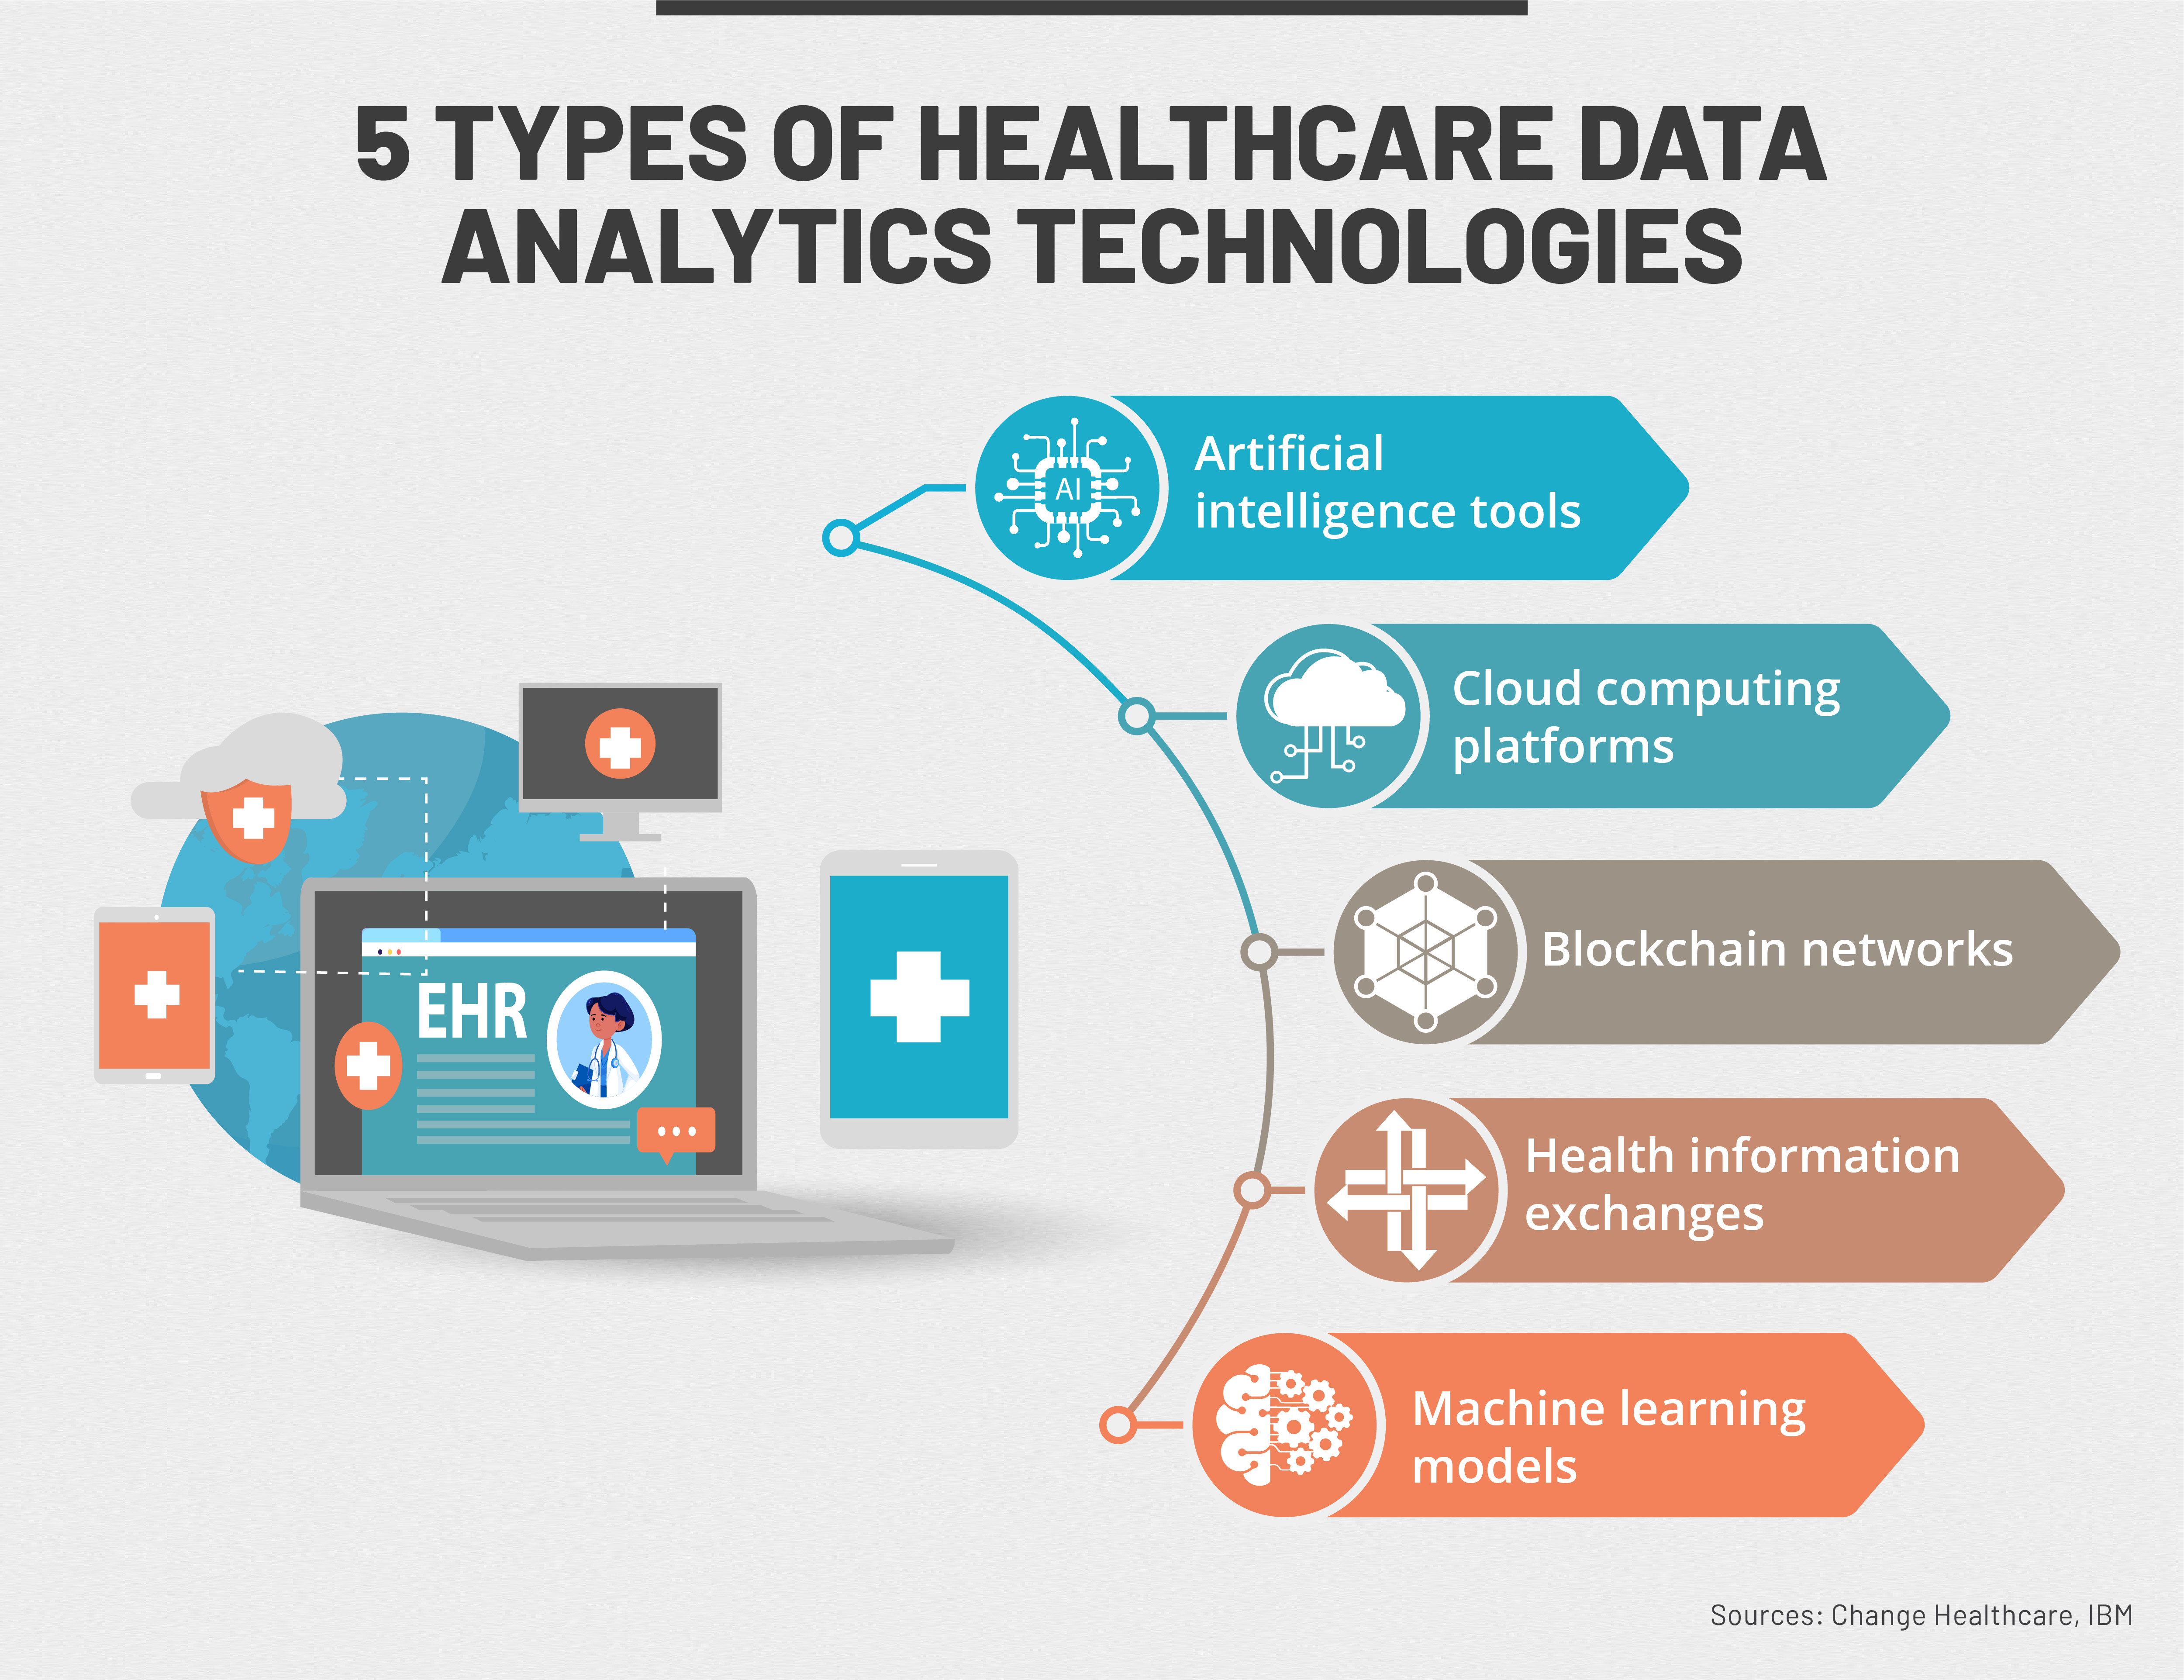 Five technologies that healthcare organizations use